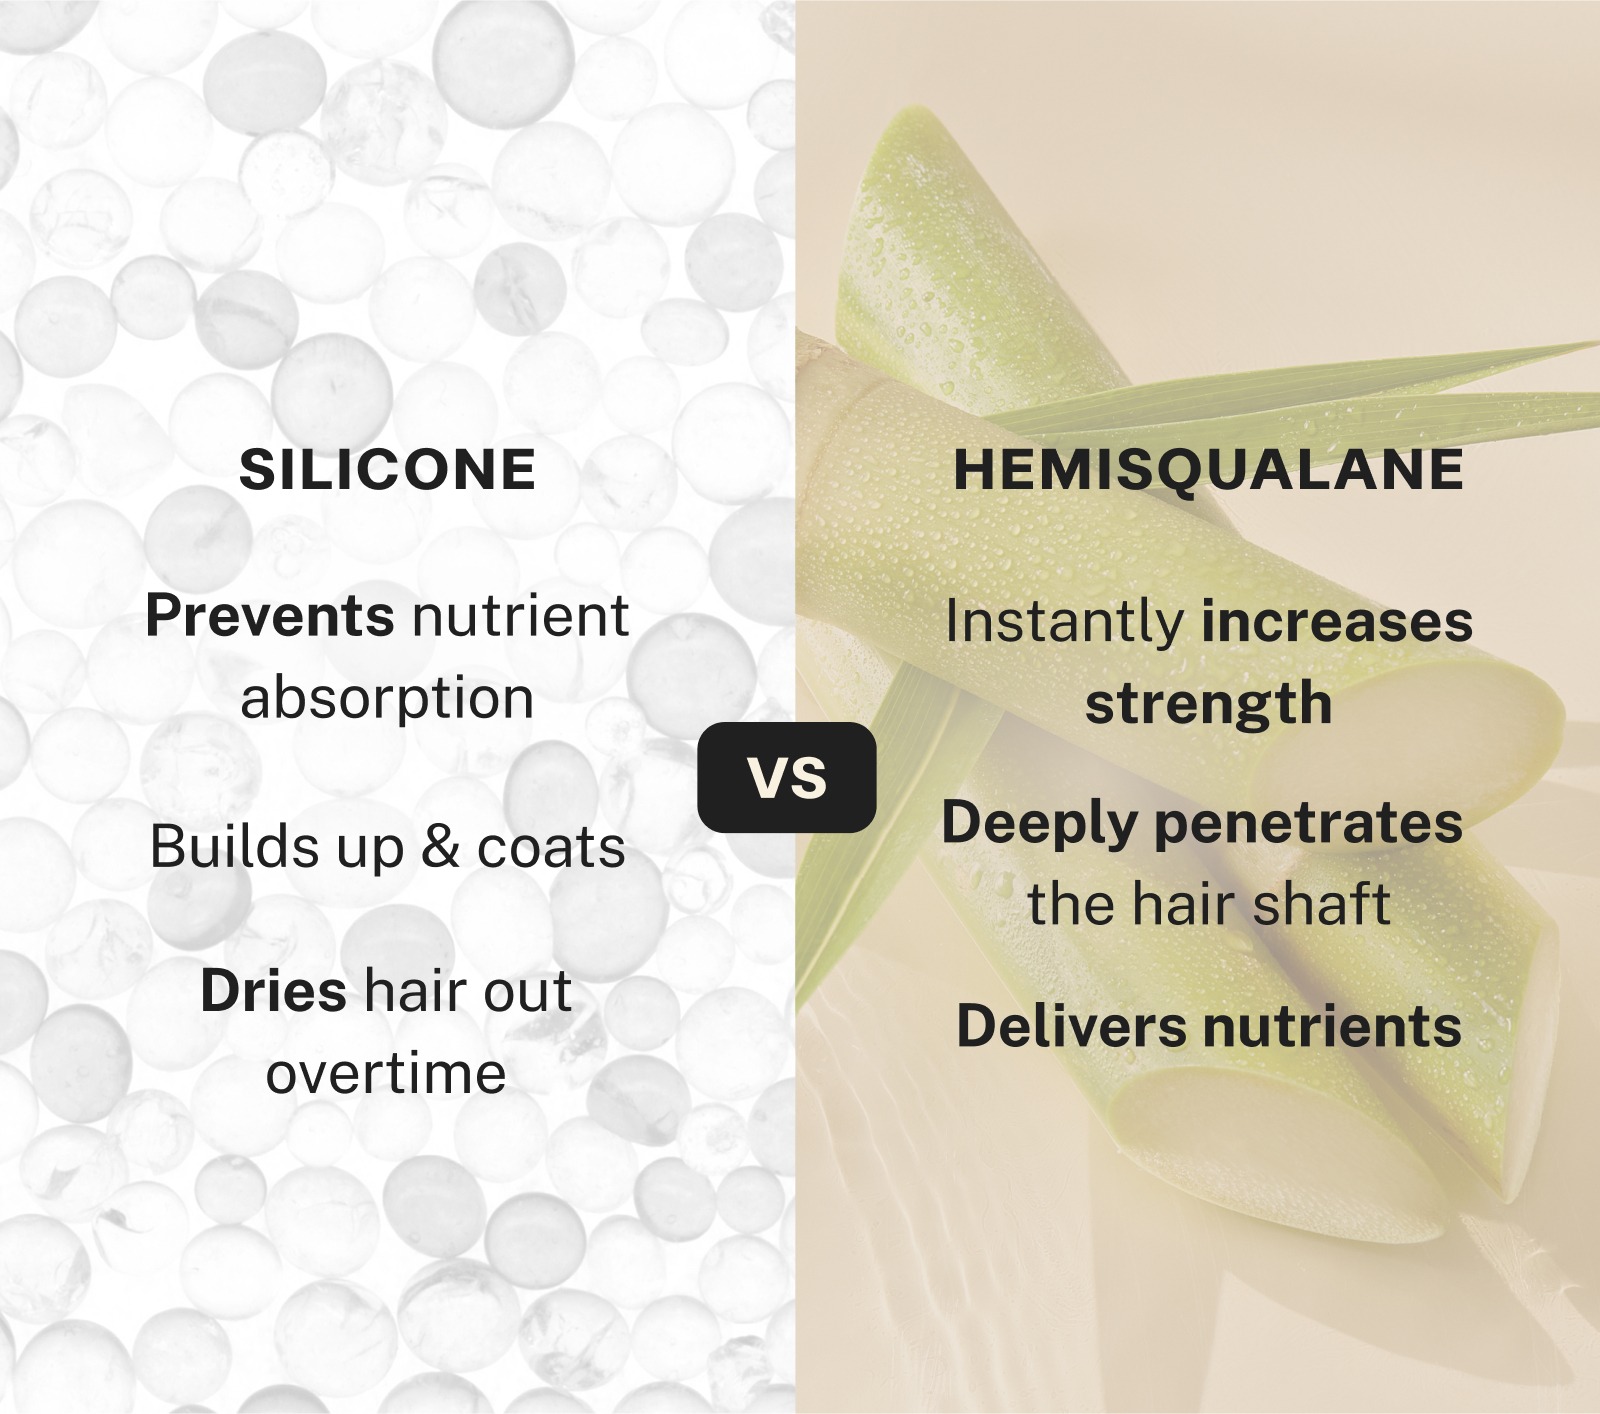 infographic of silicone vs hemisqualane. silicones prevent nutrient absorption, builds up and coats, and dries hair out overtime. hemisqualane instantly increases strength, deeply penetrates the hair shaft, and delivers nutrients.